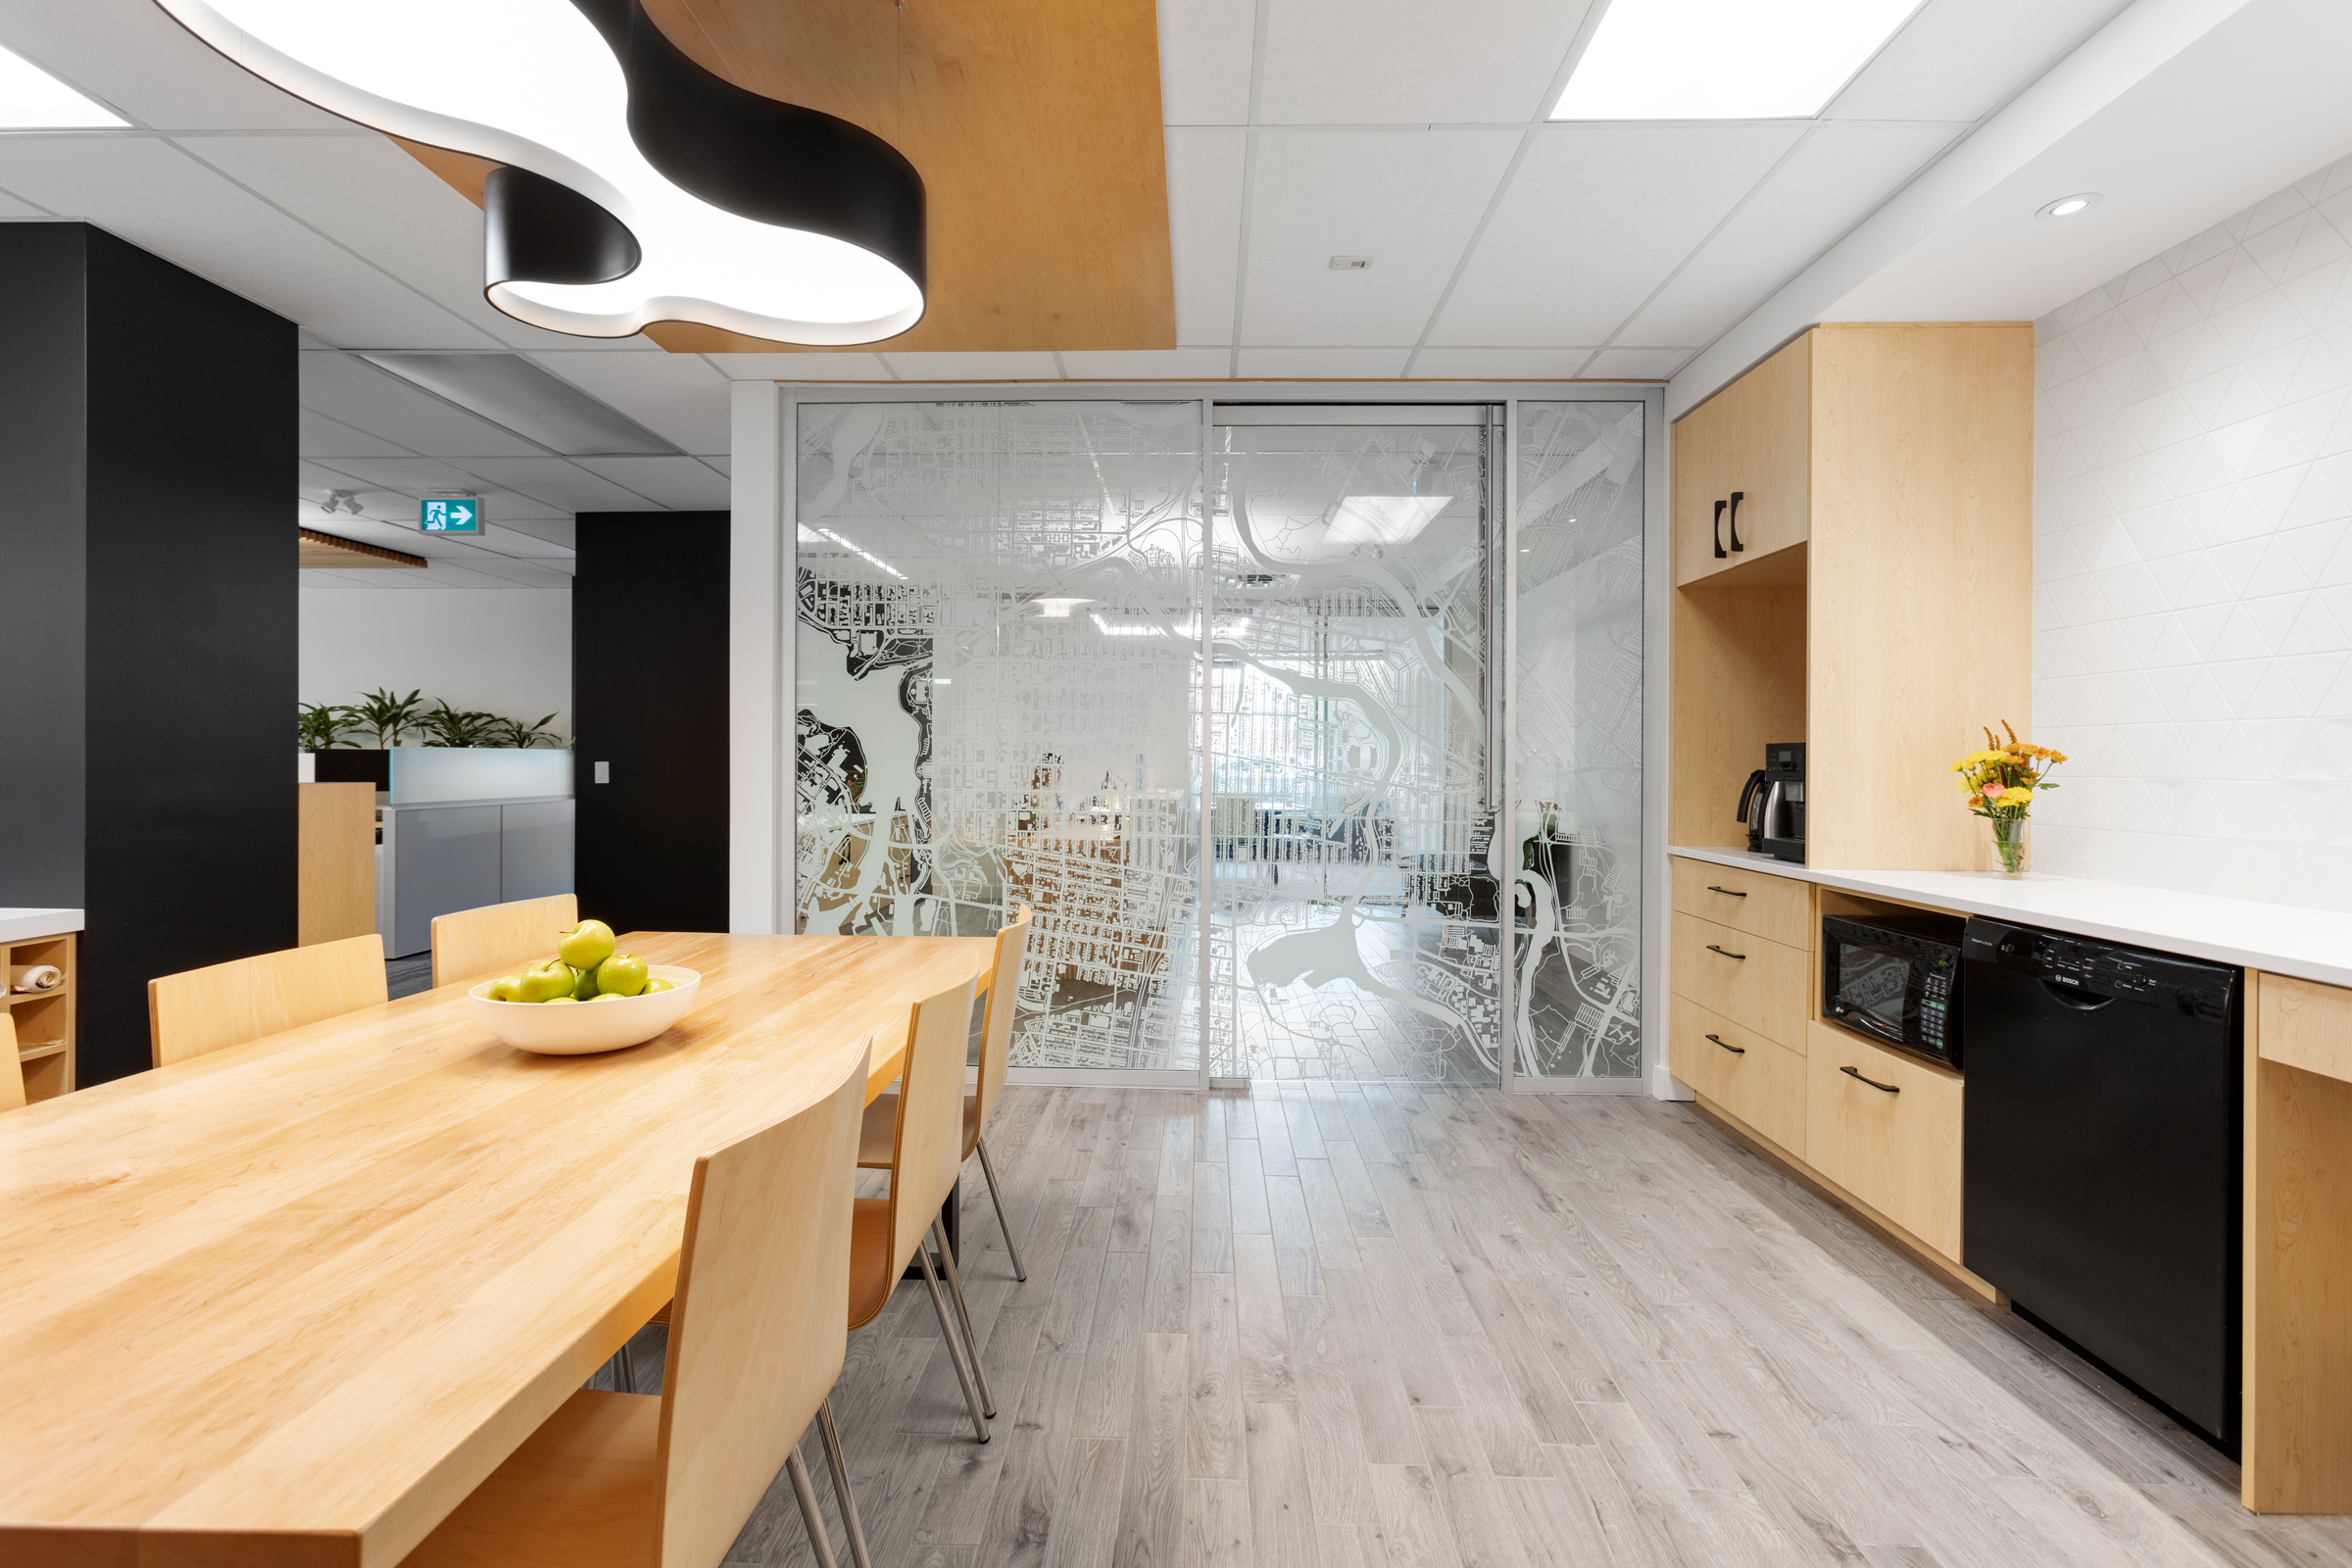 Sustainable Design Experts CSV Architects on Designing Their Own Ottawa Office